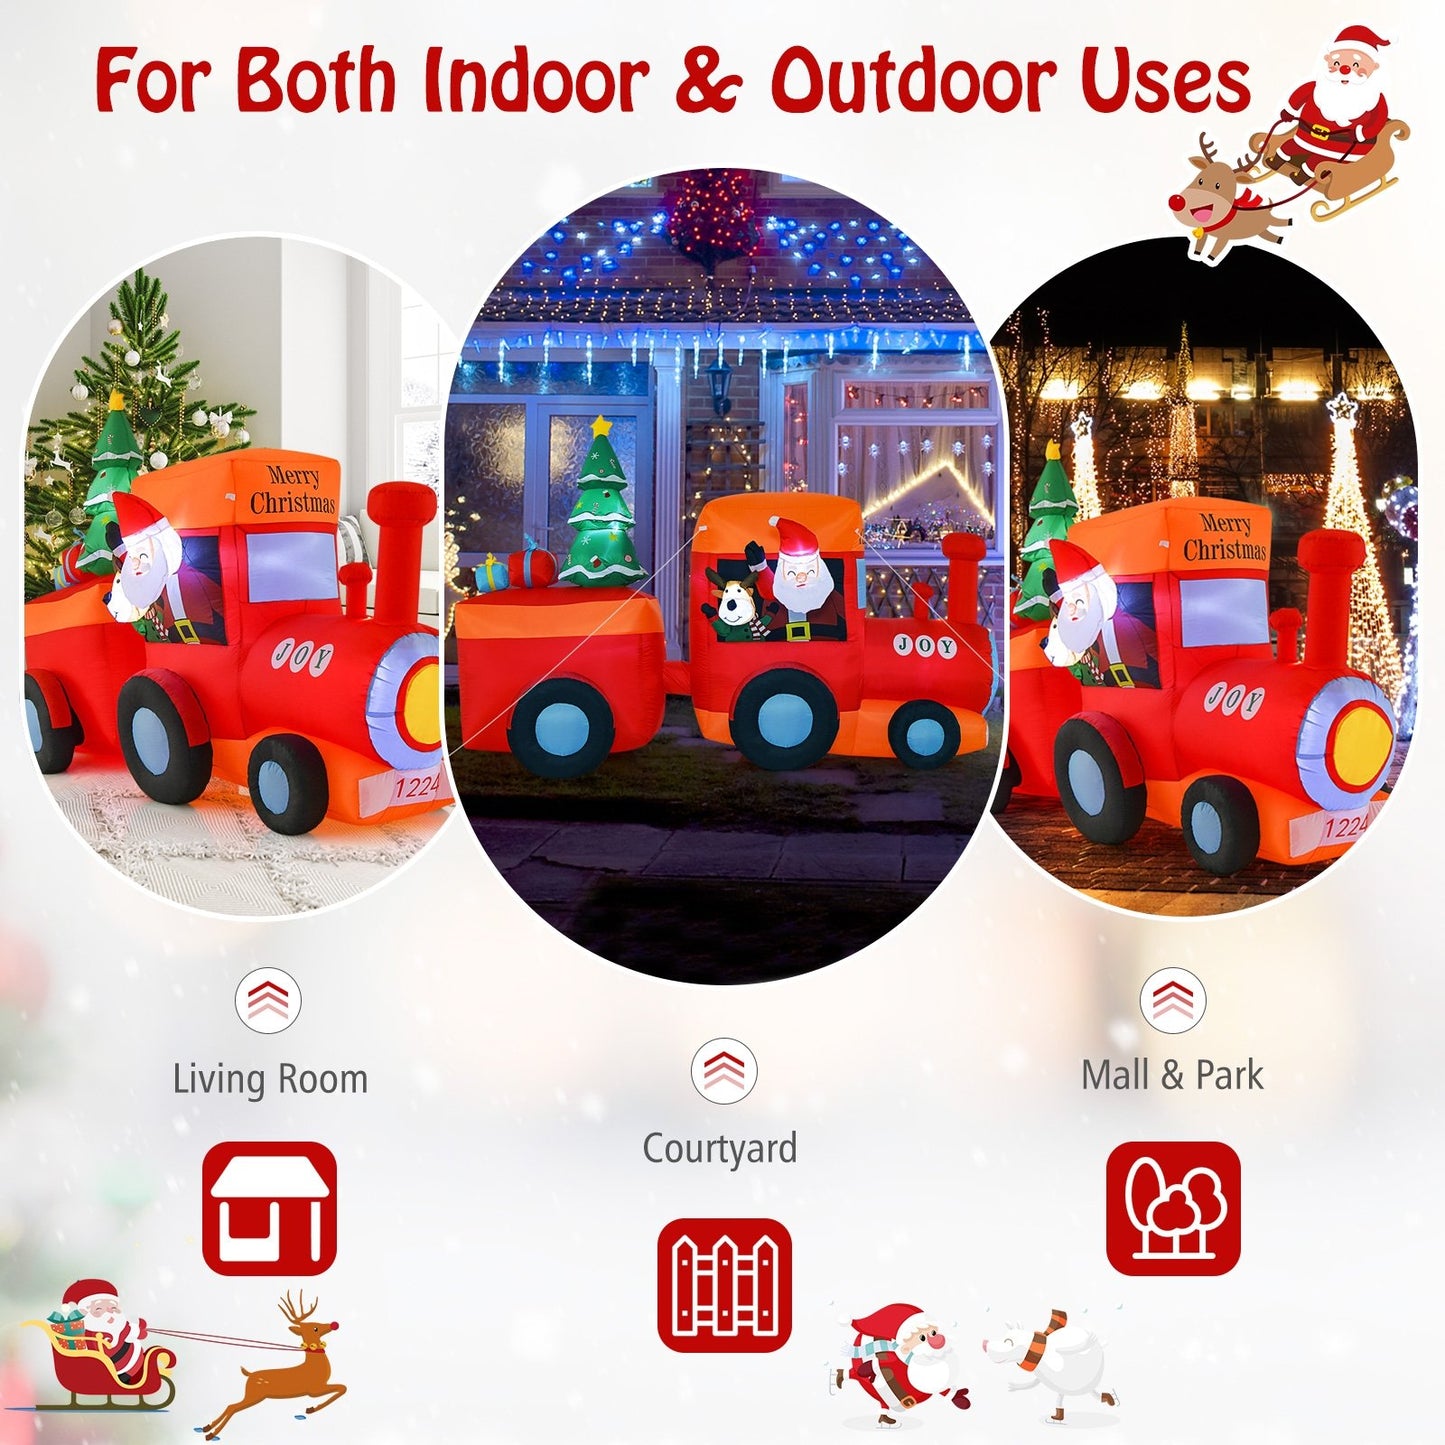 8.6 Feet Lighted Christmas Inflatable Train with Santa Claus Deer, Multicolor